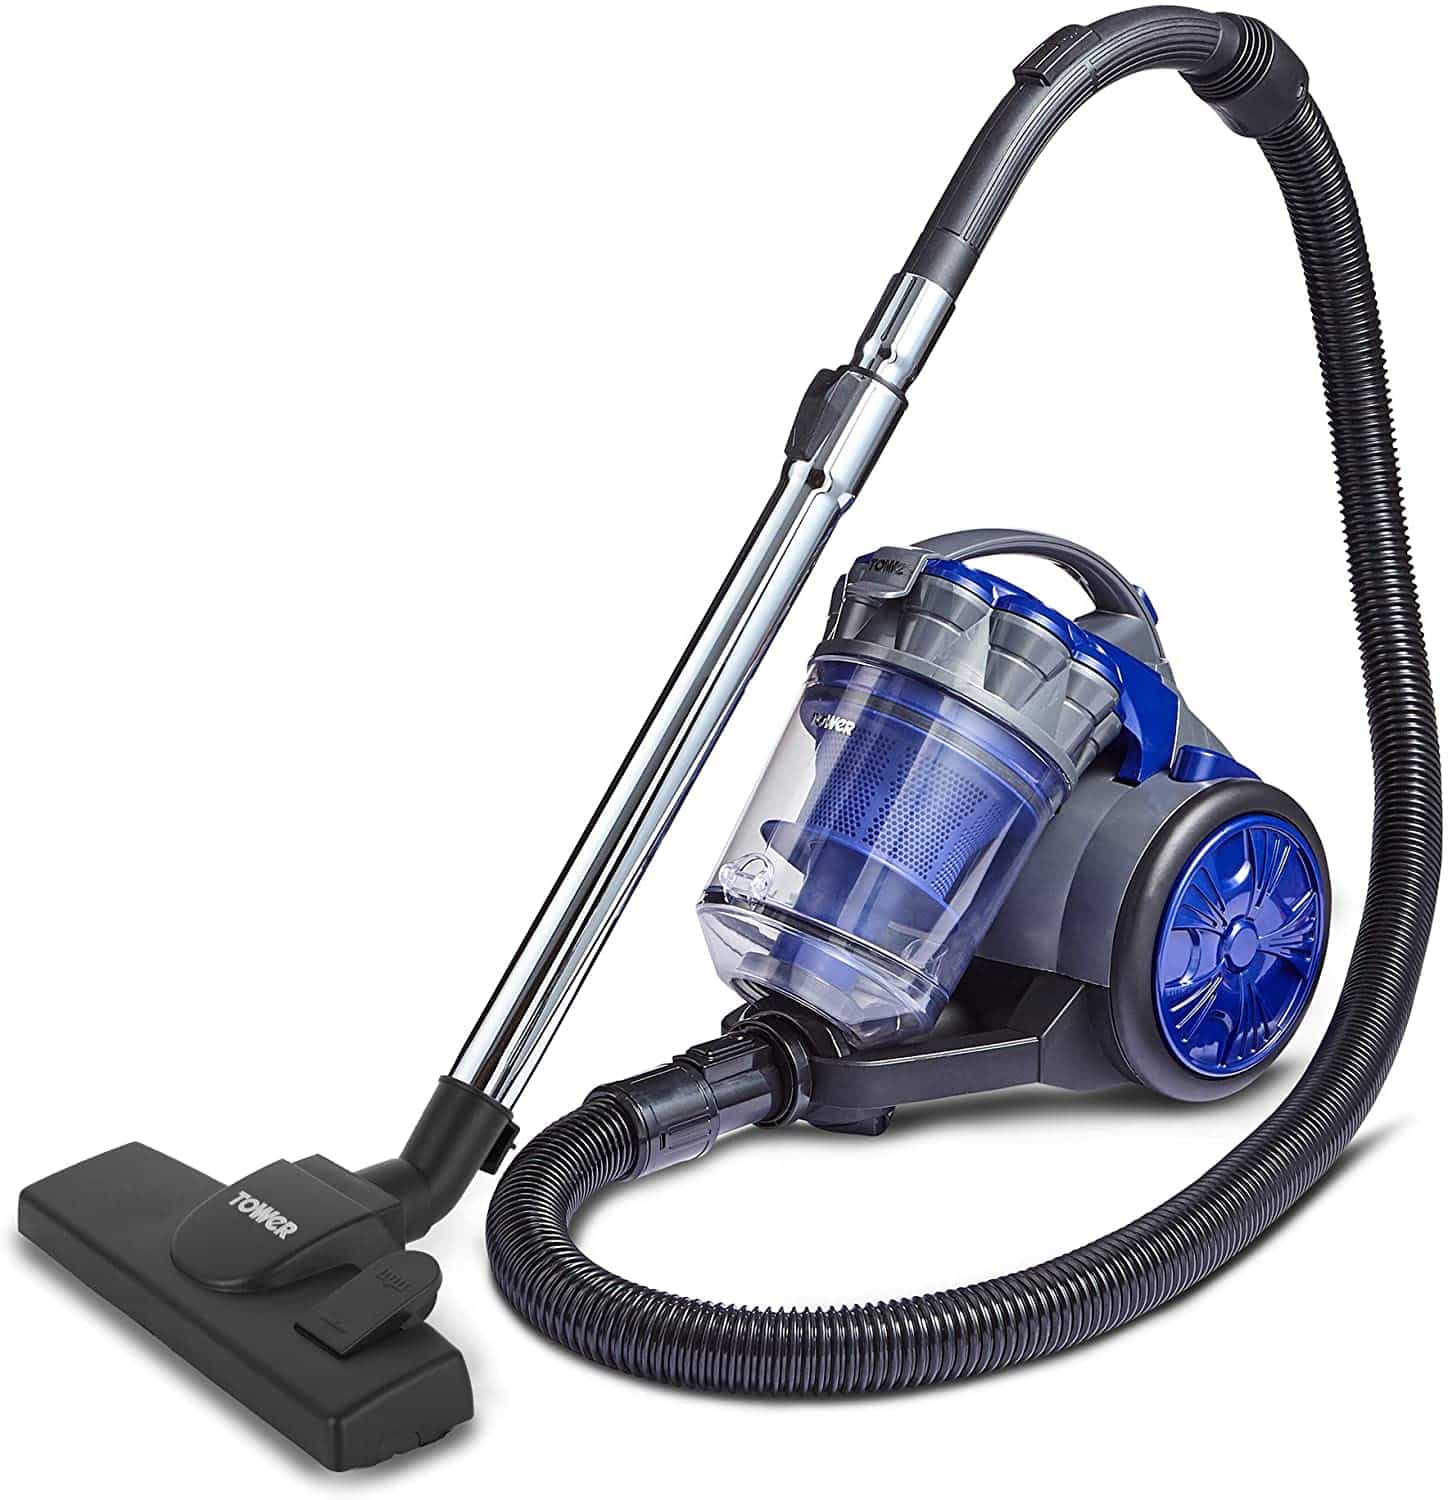 Tower TXP10 Bagless Lightweight Multi Cyclonic Vacuum Cleaning Cylinder